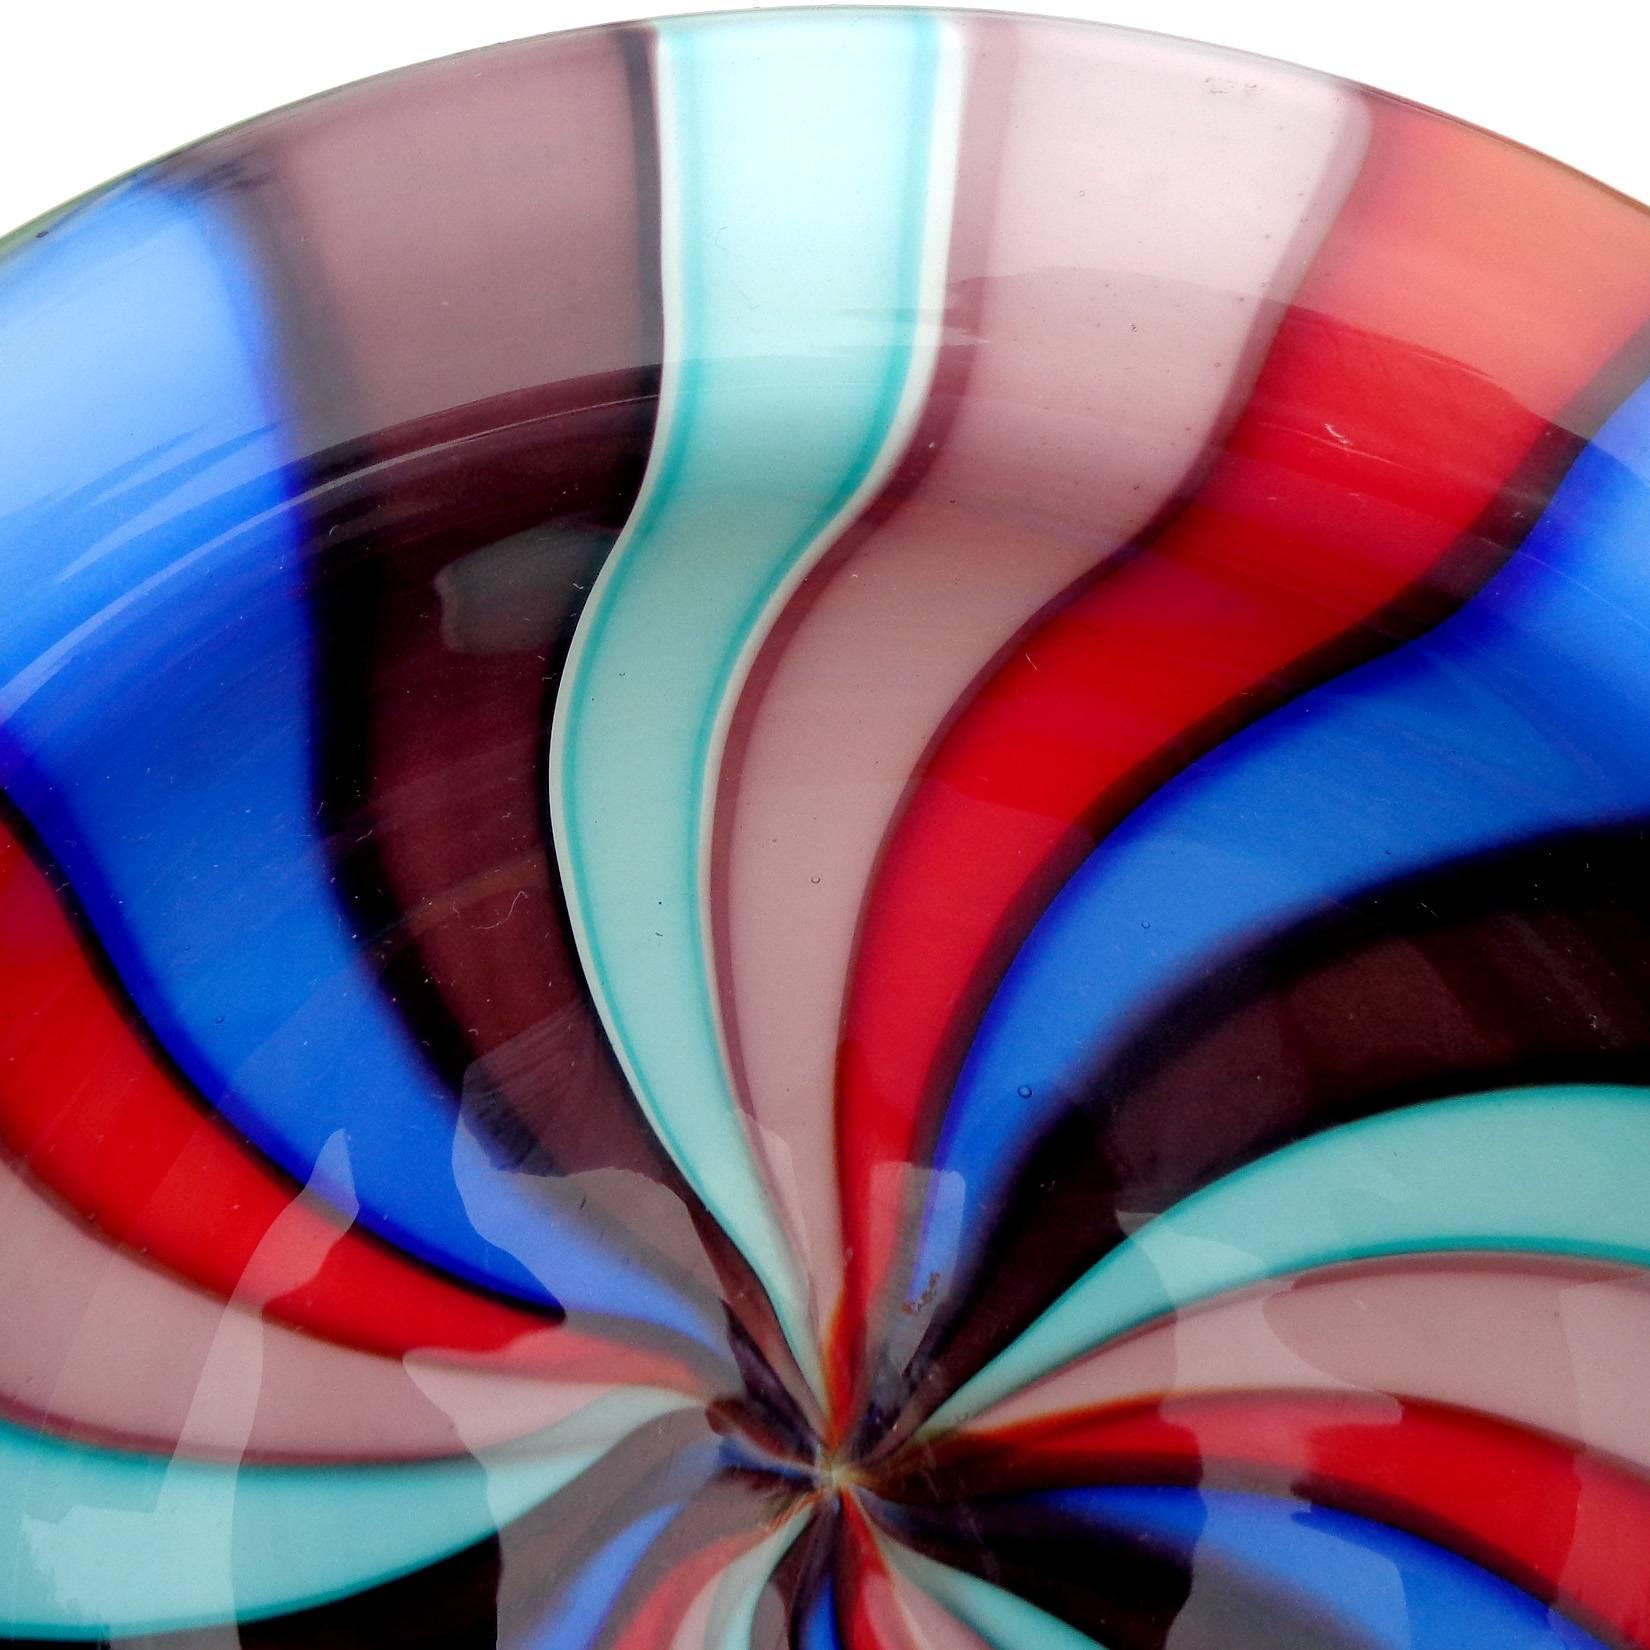 Beautiful vintage Murano hand blown teal, cobalt blue, dark purple, lavender, pink and red Italian art glass decorative bowl. Created in the manner of the Cenedese Company. The piece is thick and heavy, with outer white layer. Can be used as a